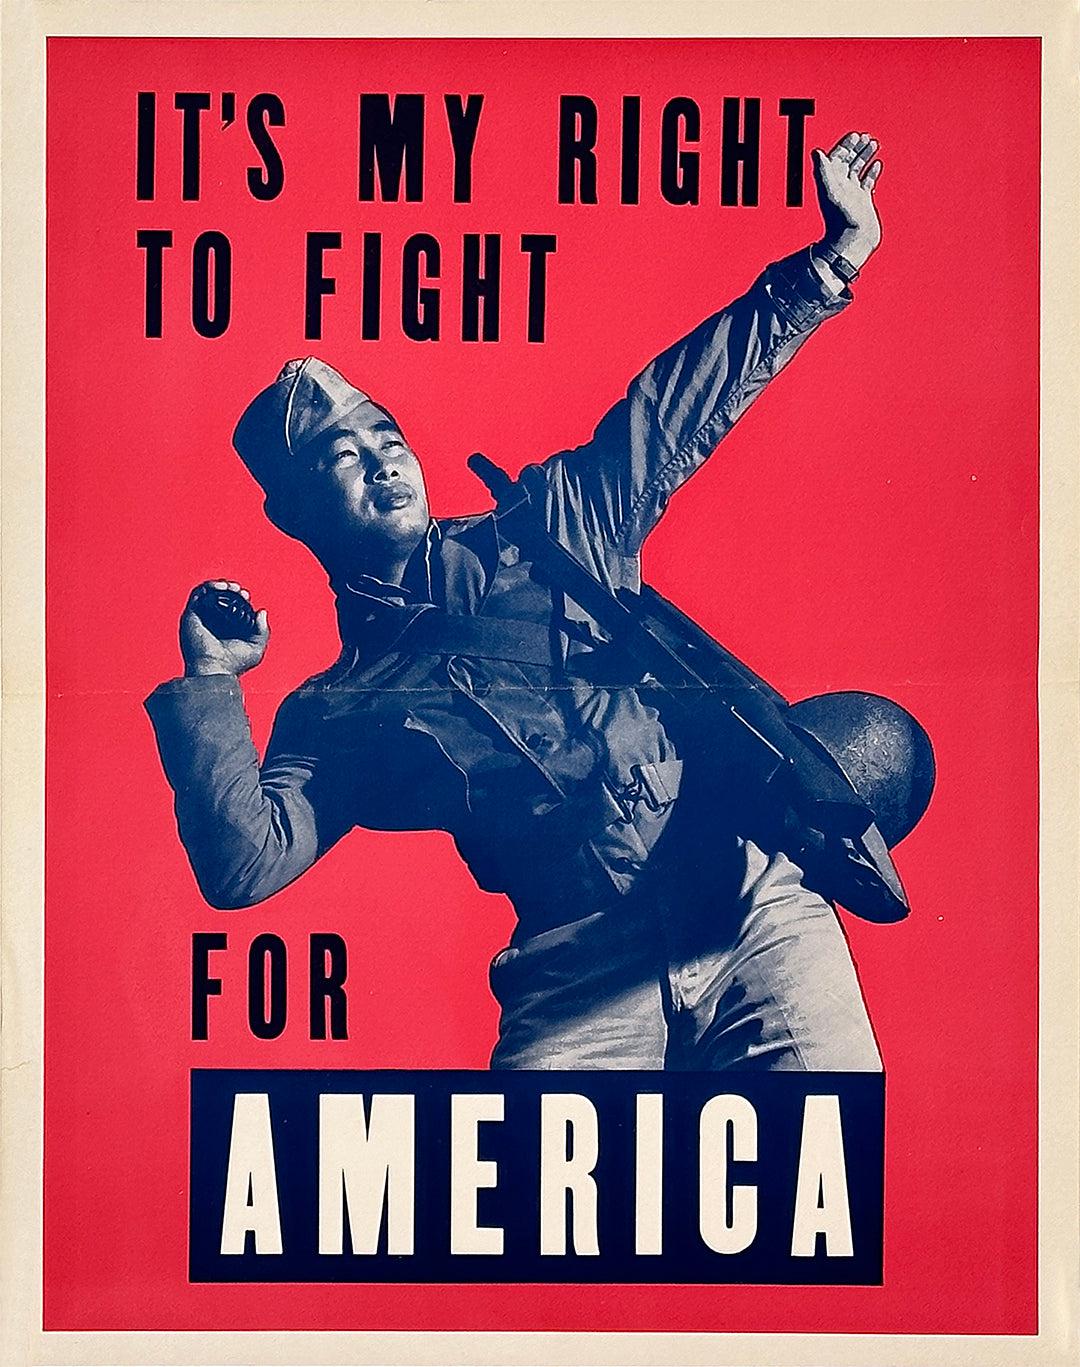 Rare Original WWII Poster It's My Right to Fight for America by Robert Jones 1944 Japanese Hawaii